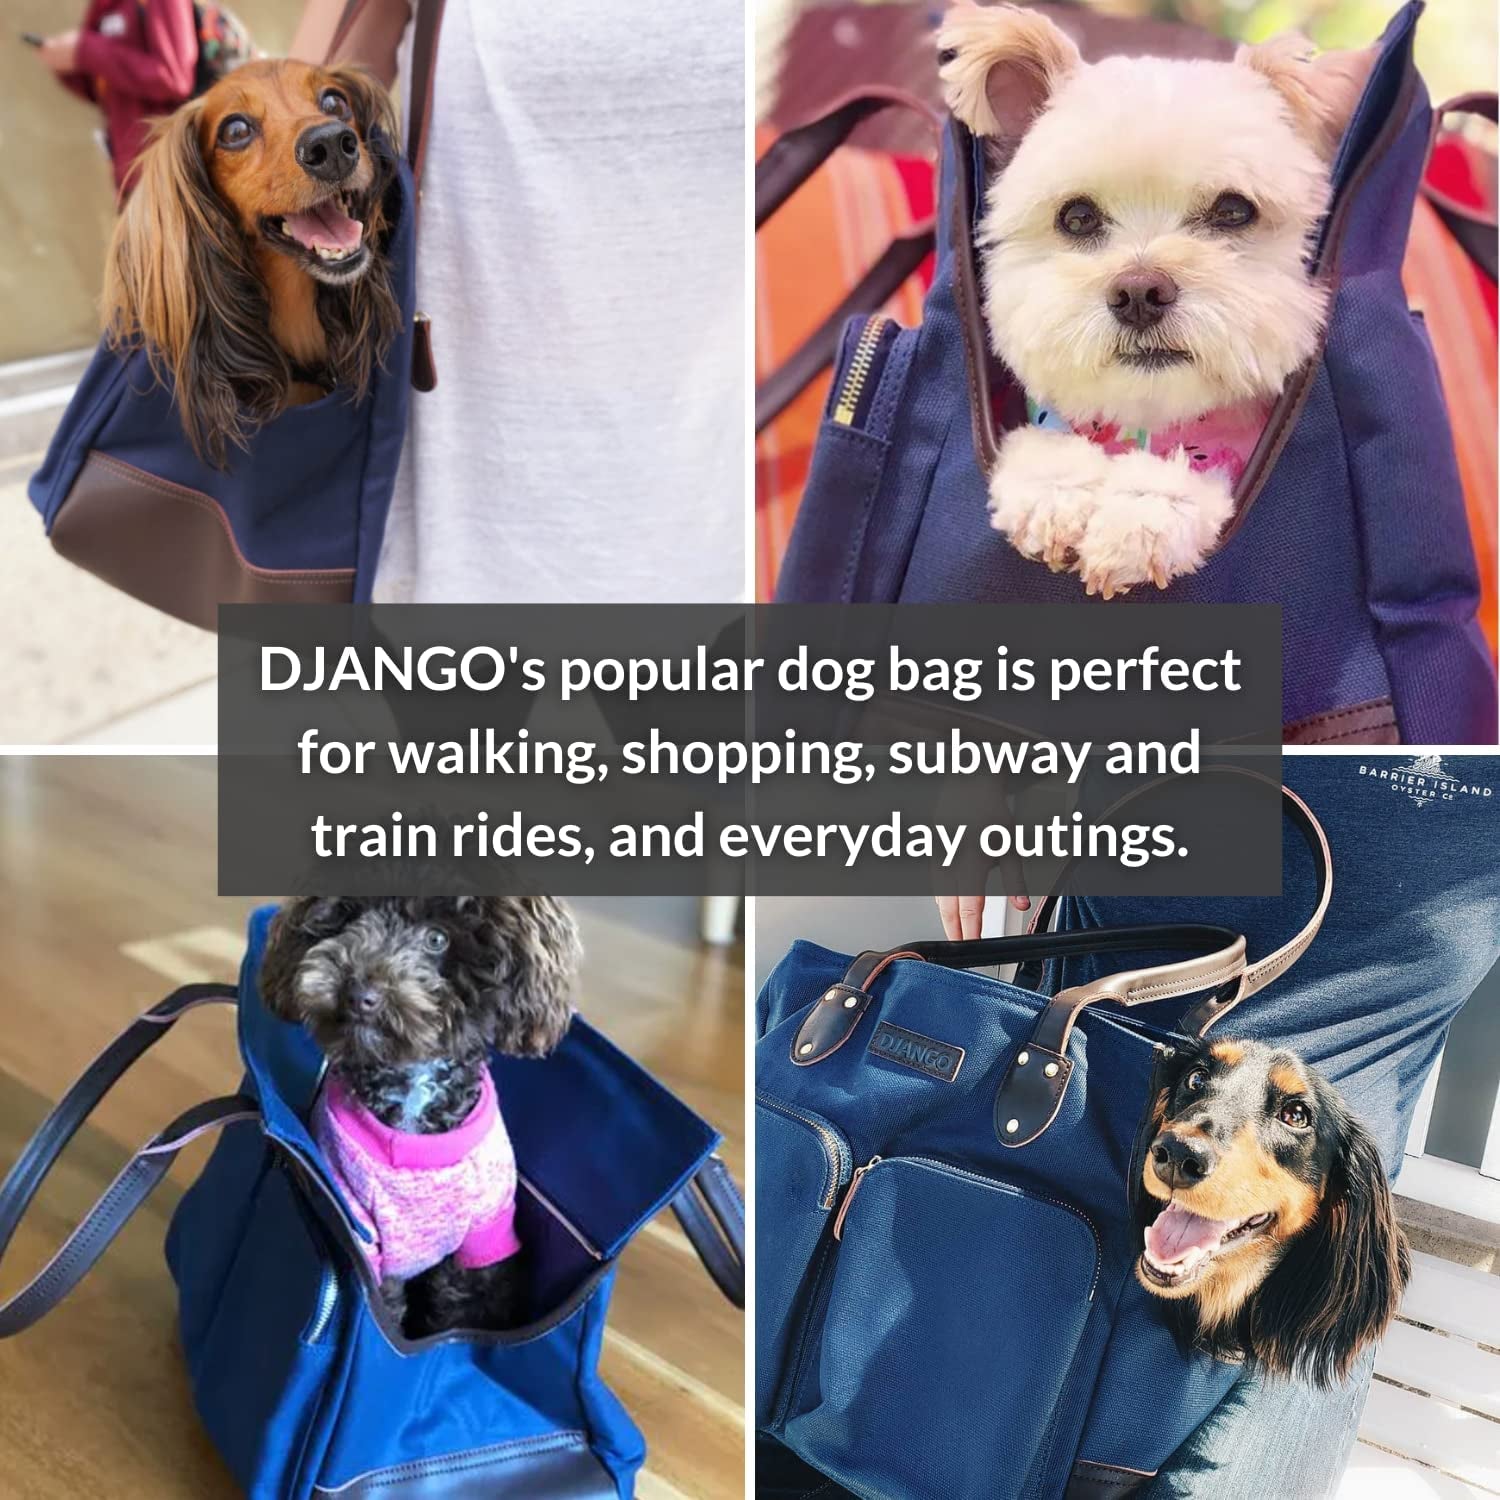 Django Dog Carrier Bag - Waxed Canvas and Leather Soft-Sided Pet Travel Tote with Bag-to-Harness Safety Tether & Secure Zipper Pockets (Large, Olive